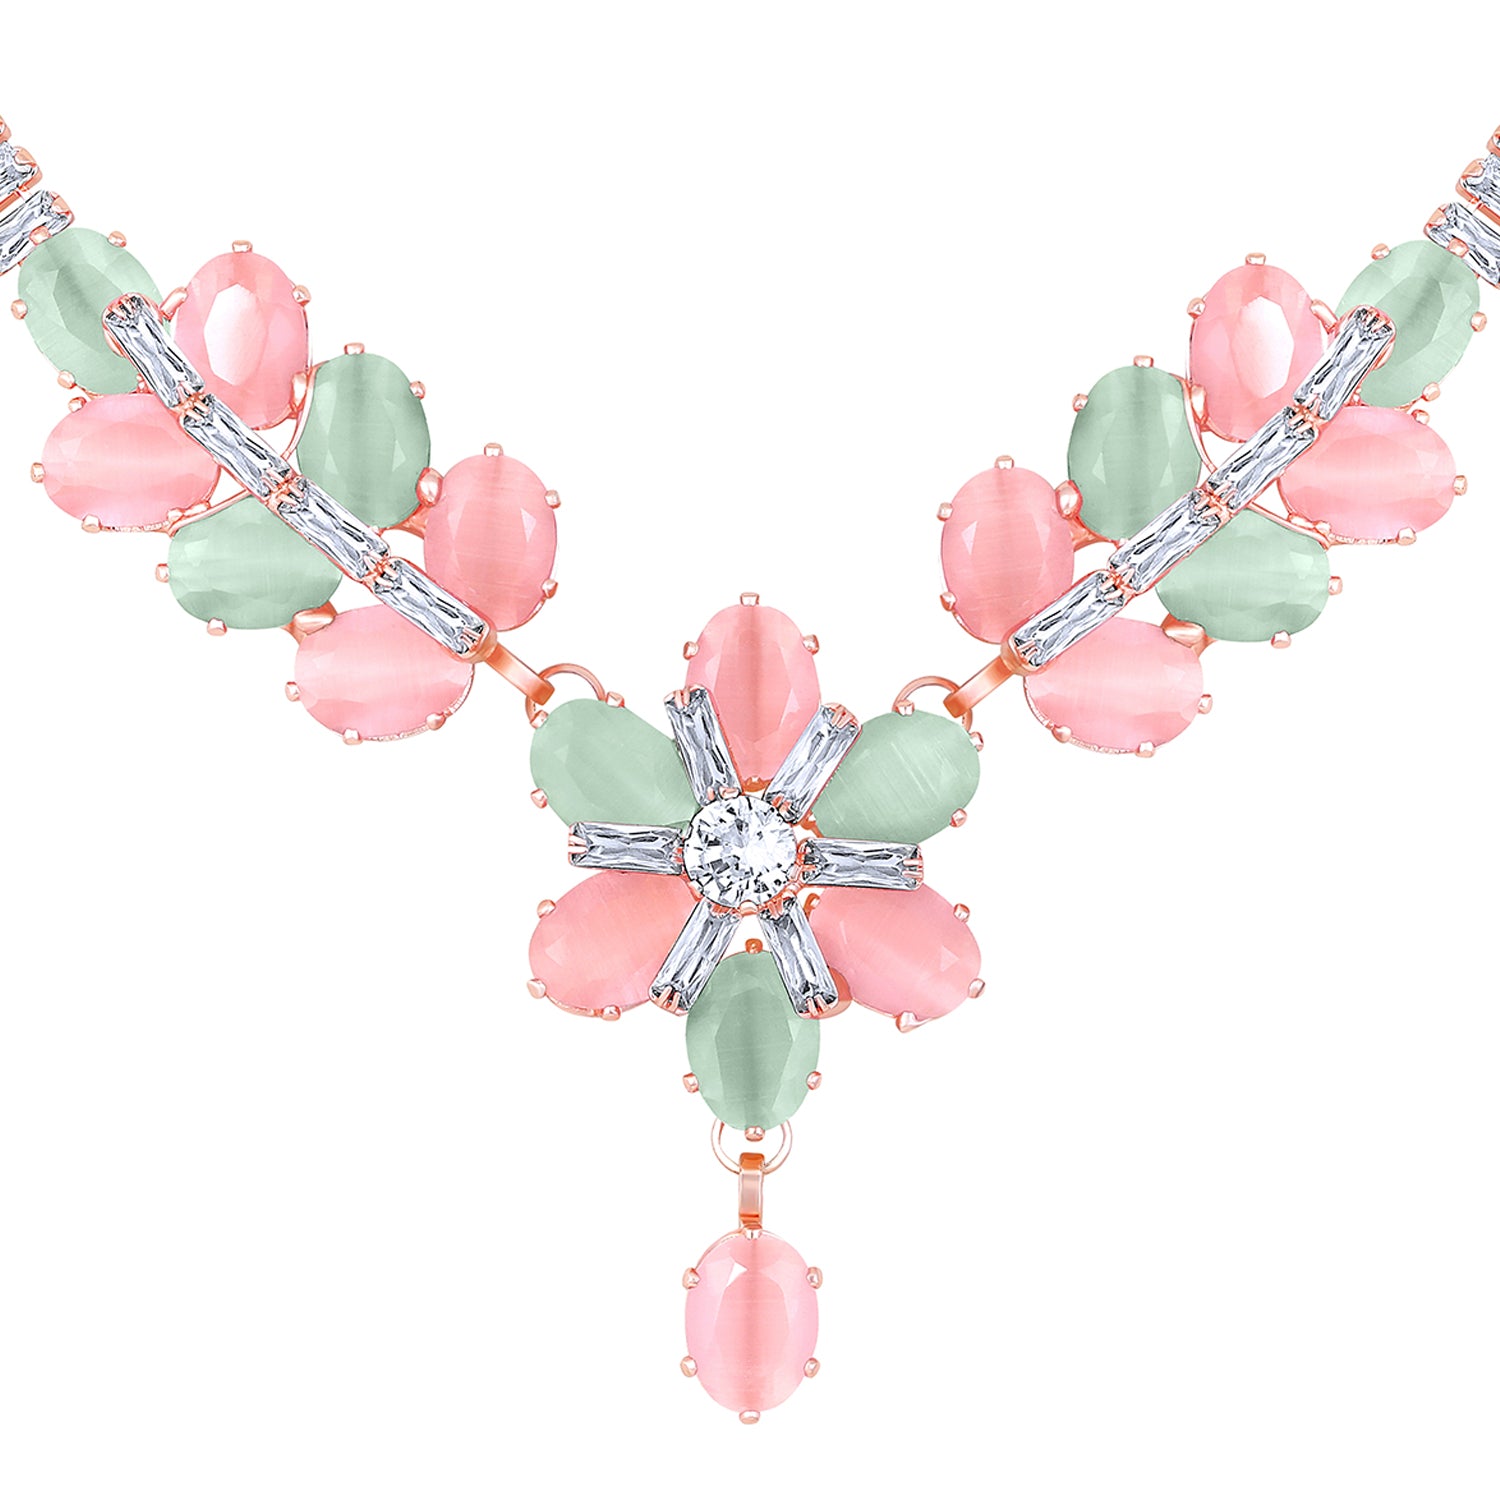 Elegant Floral CZ Necklace Paired with a Pair of Earrings